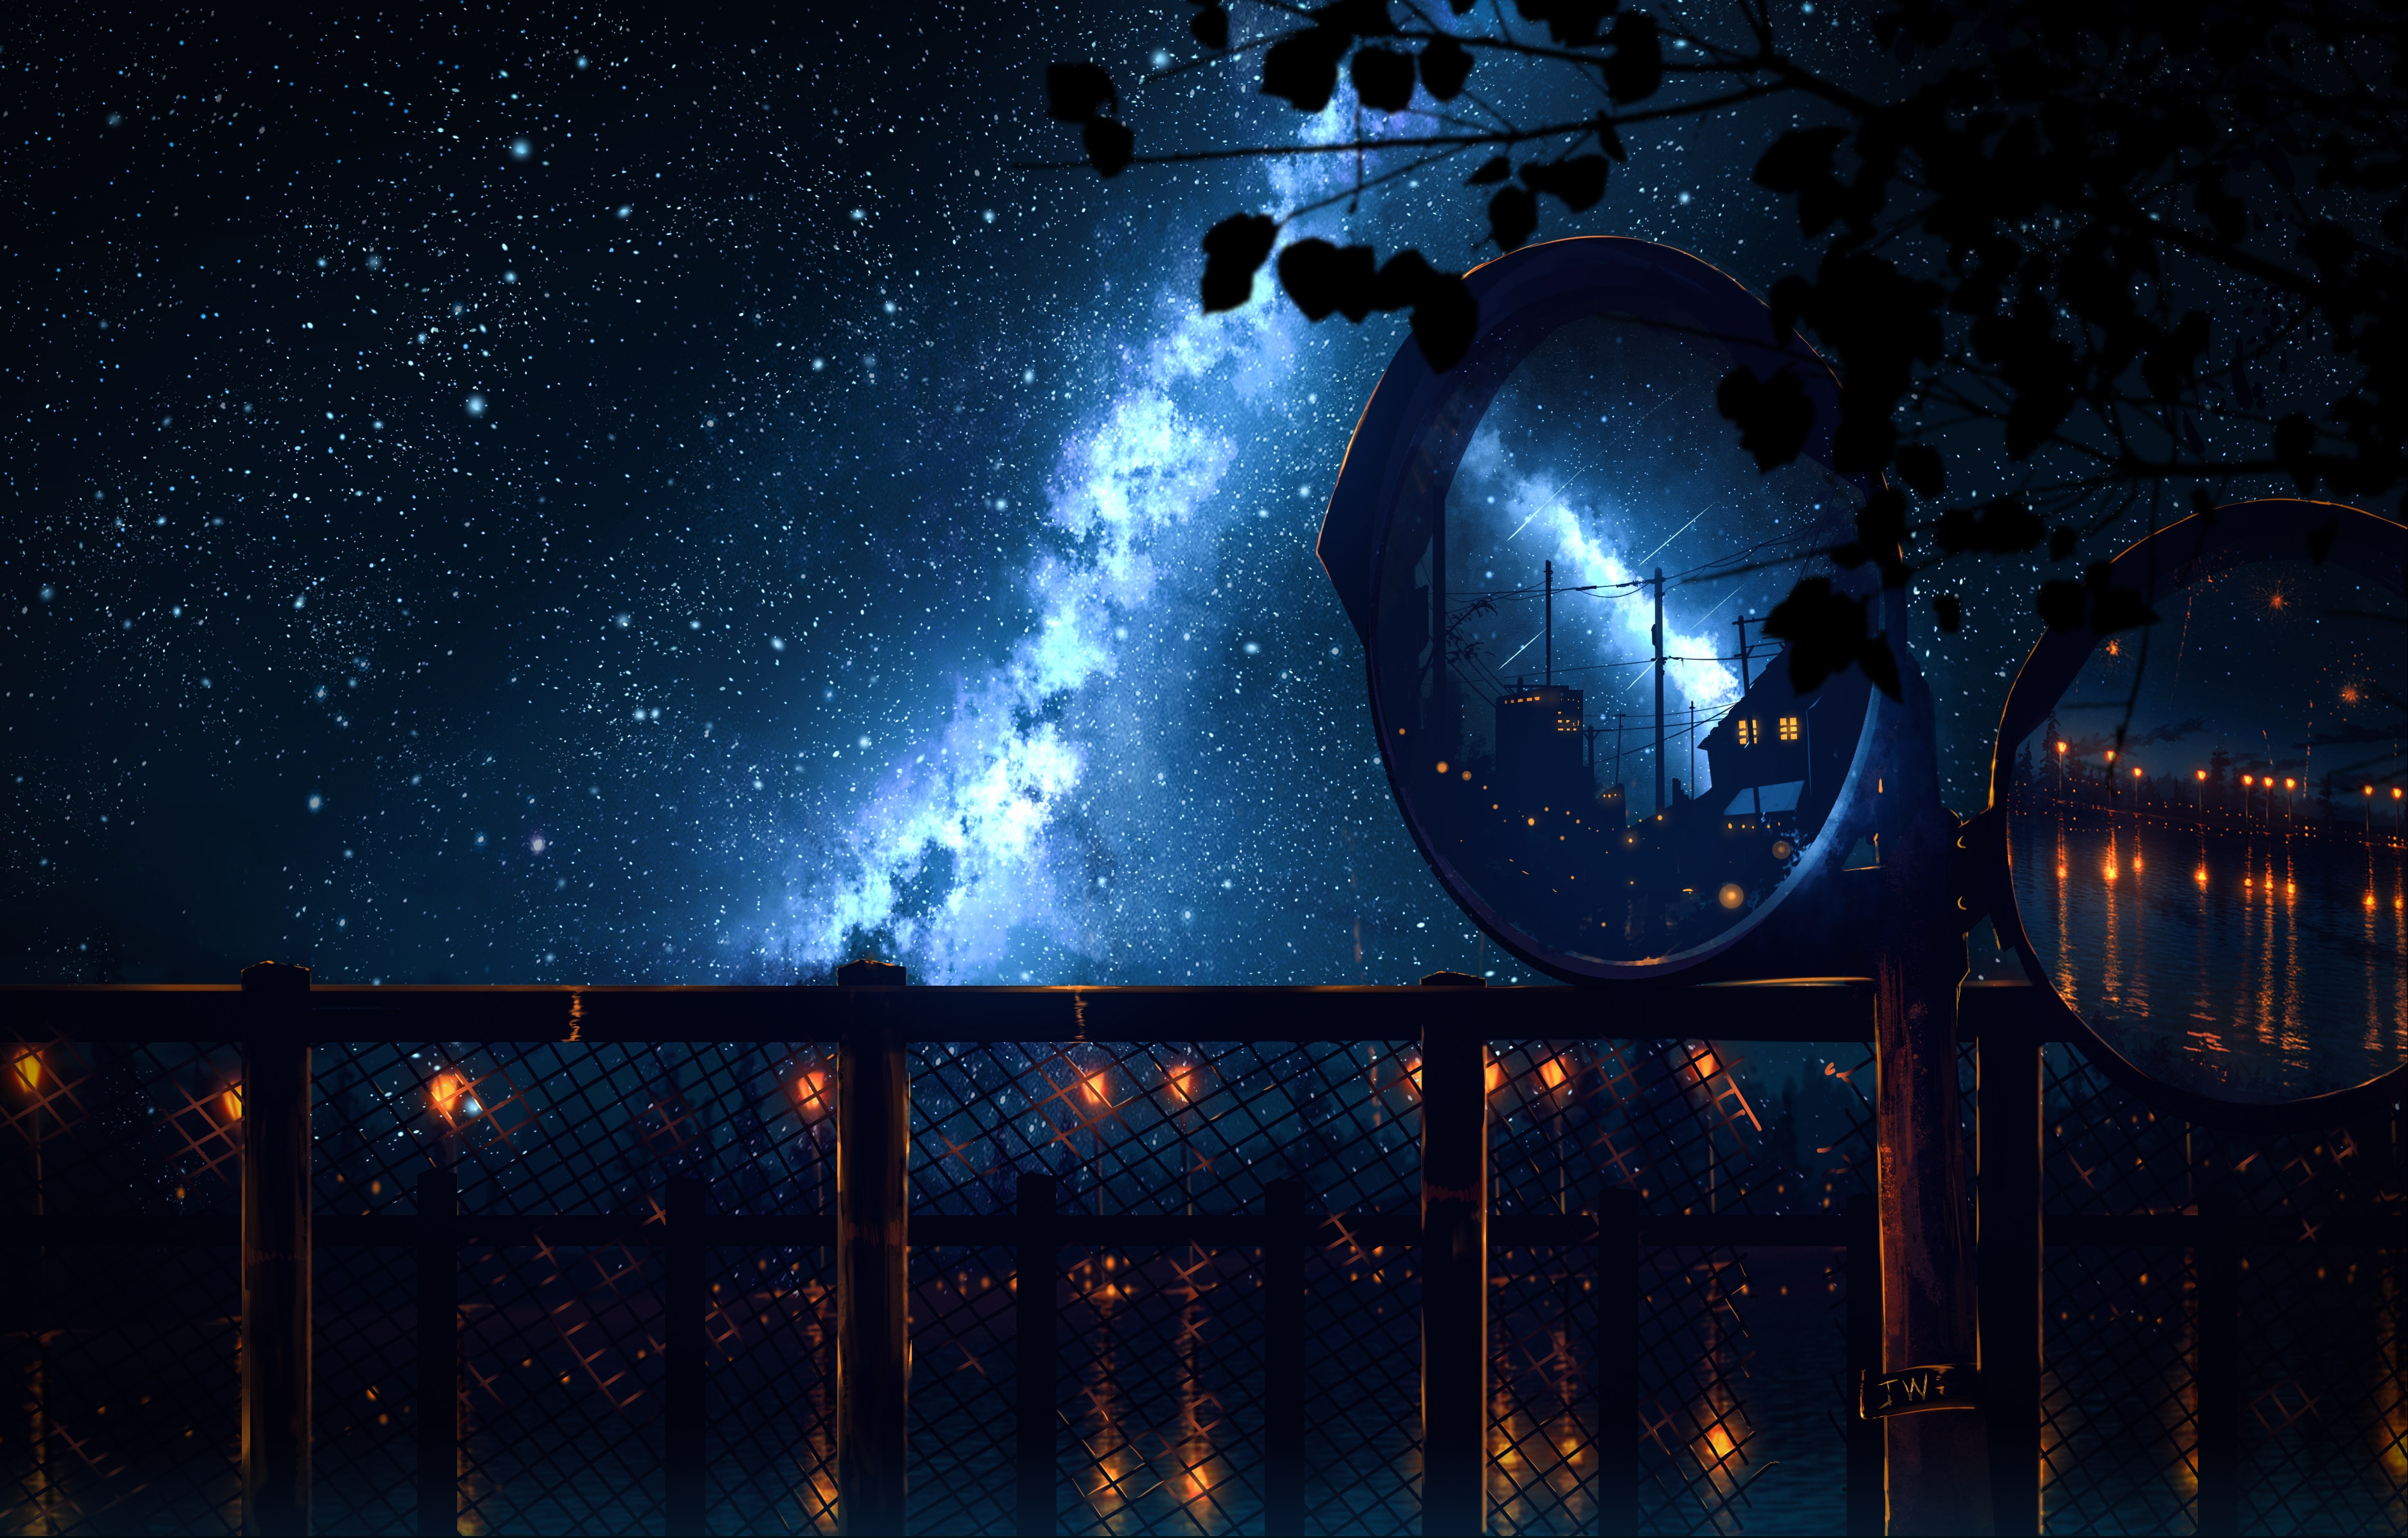 Wallpapers starry sky picturesque fence on the desktop